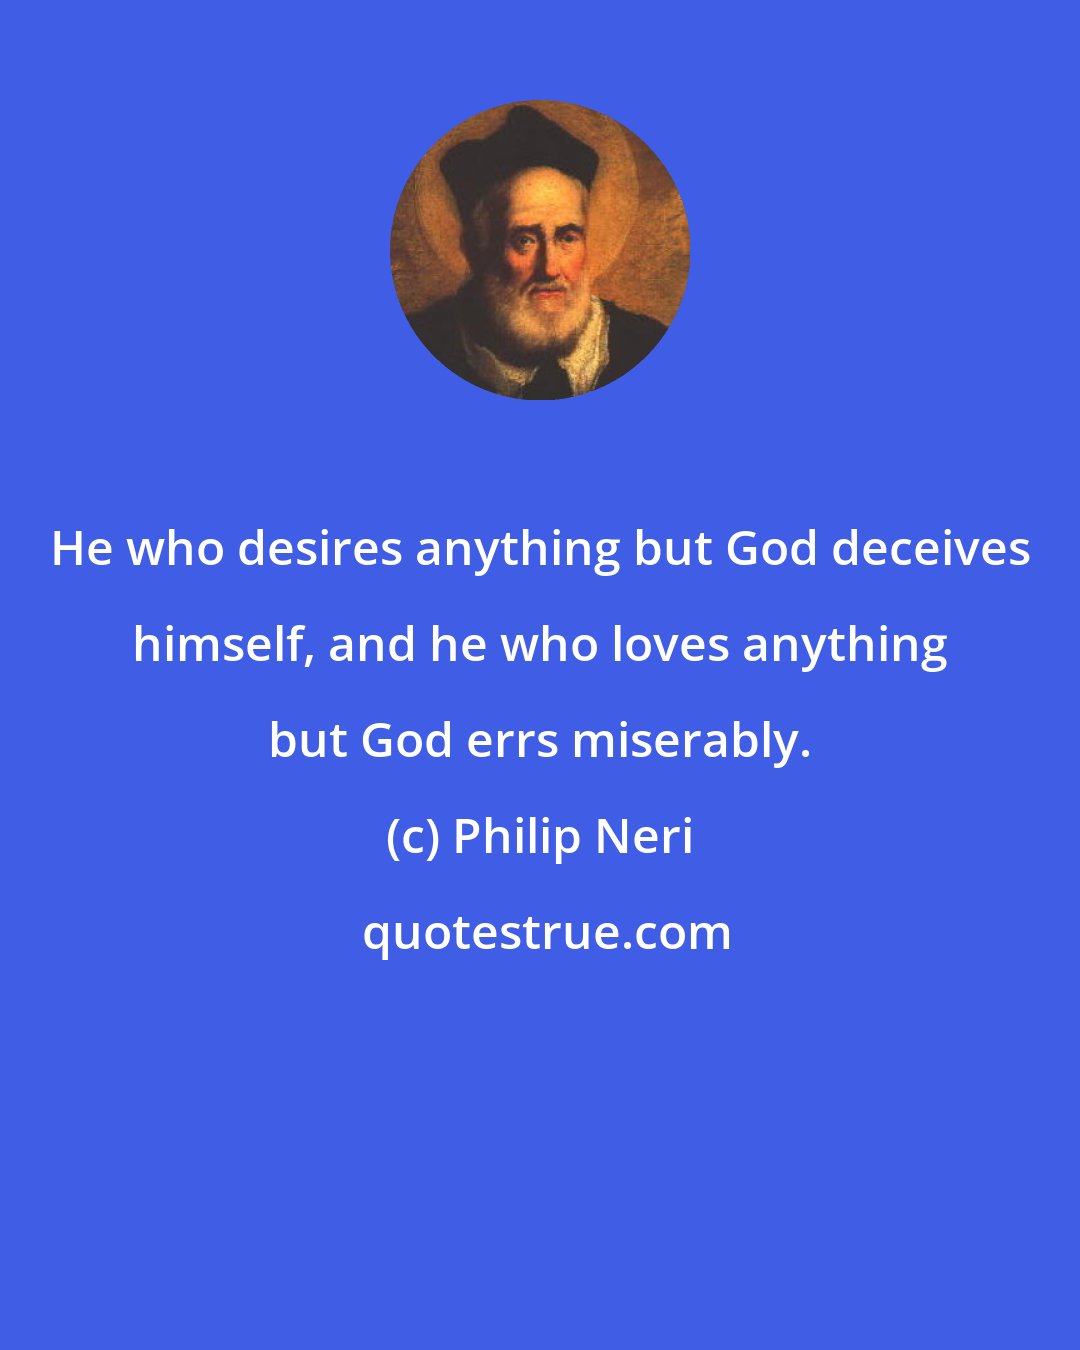 Philip Neri: He who desires anything but God deceives himself, and he who loves anything but God errs miserably.